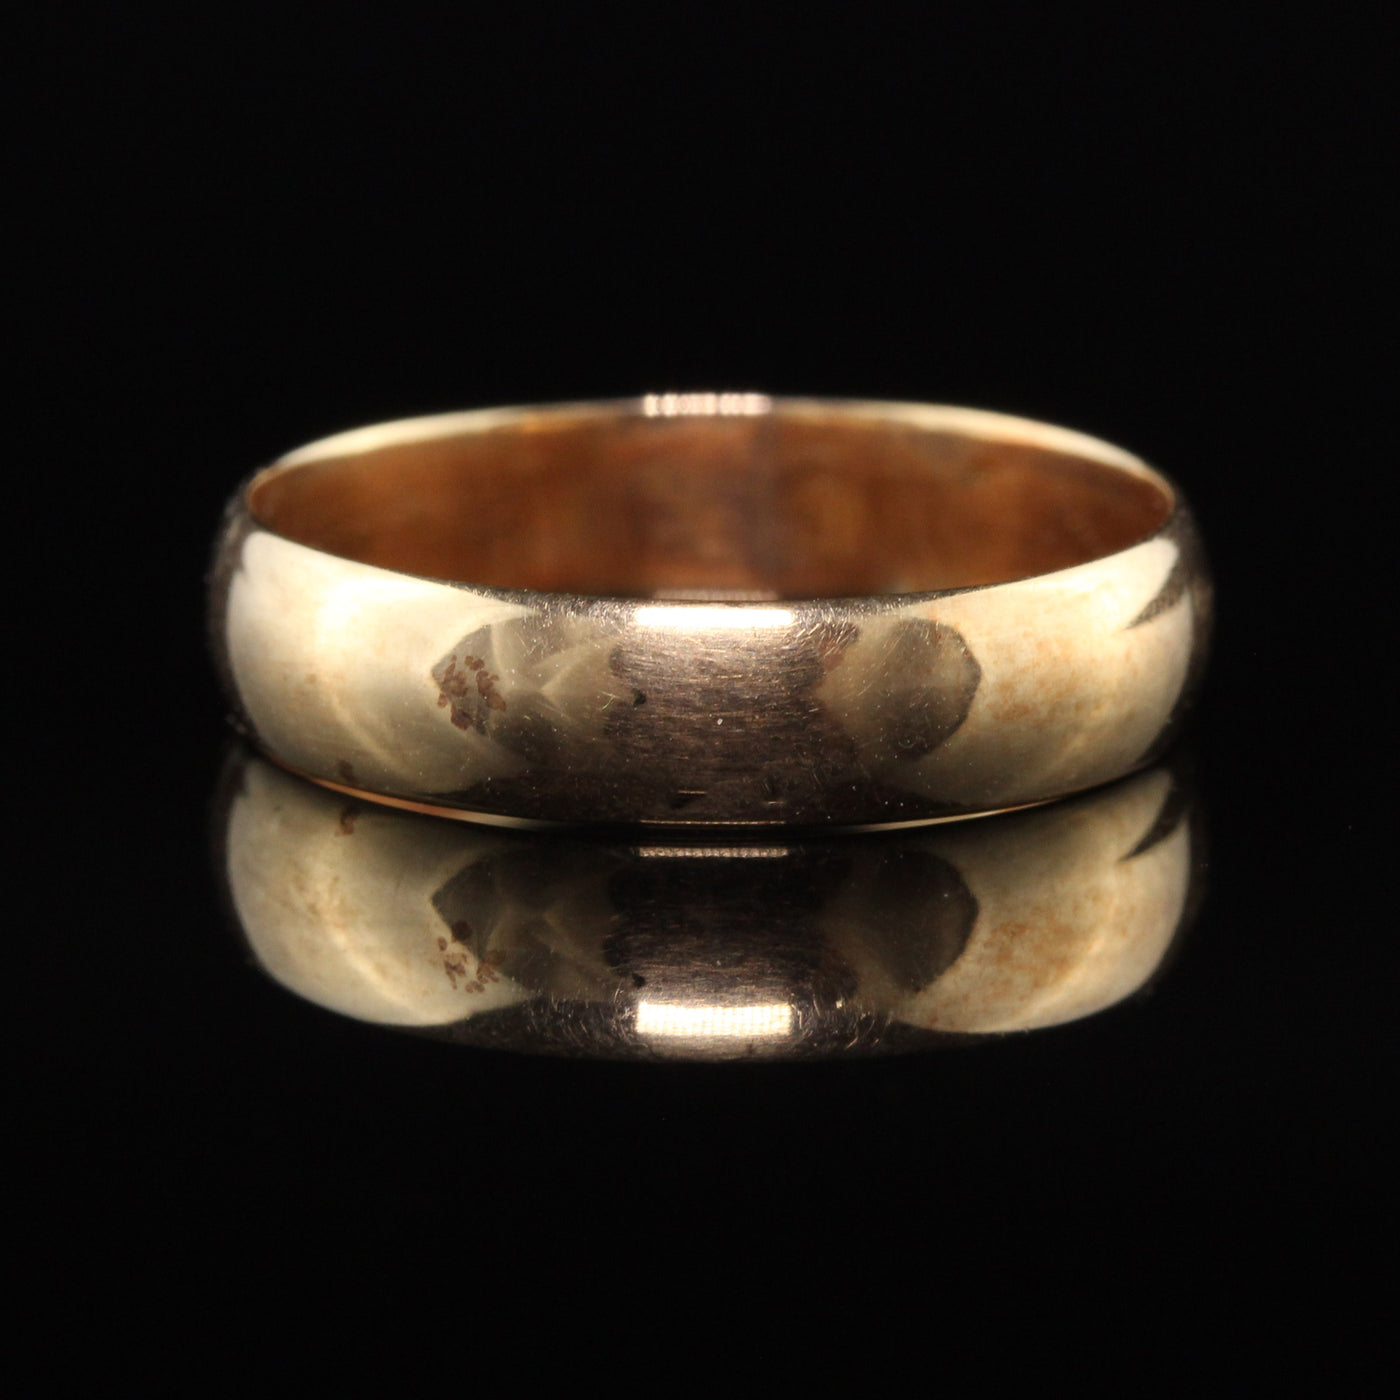 Antique Victorian 14K Yellow Gold Engraved Wedding Band - Size 4 1/4